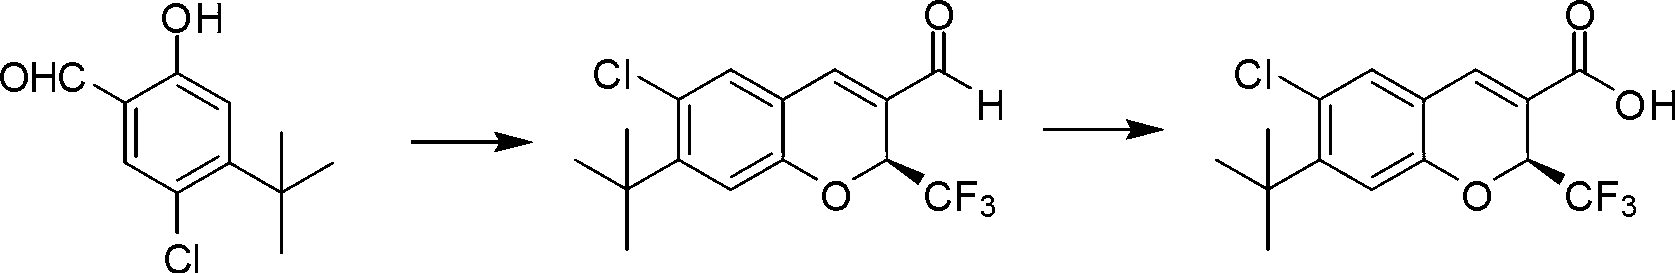 Synthetic method of benzopyran chiral compound